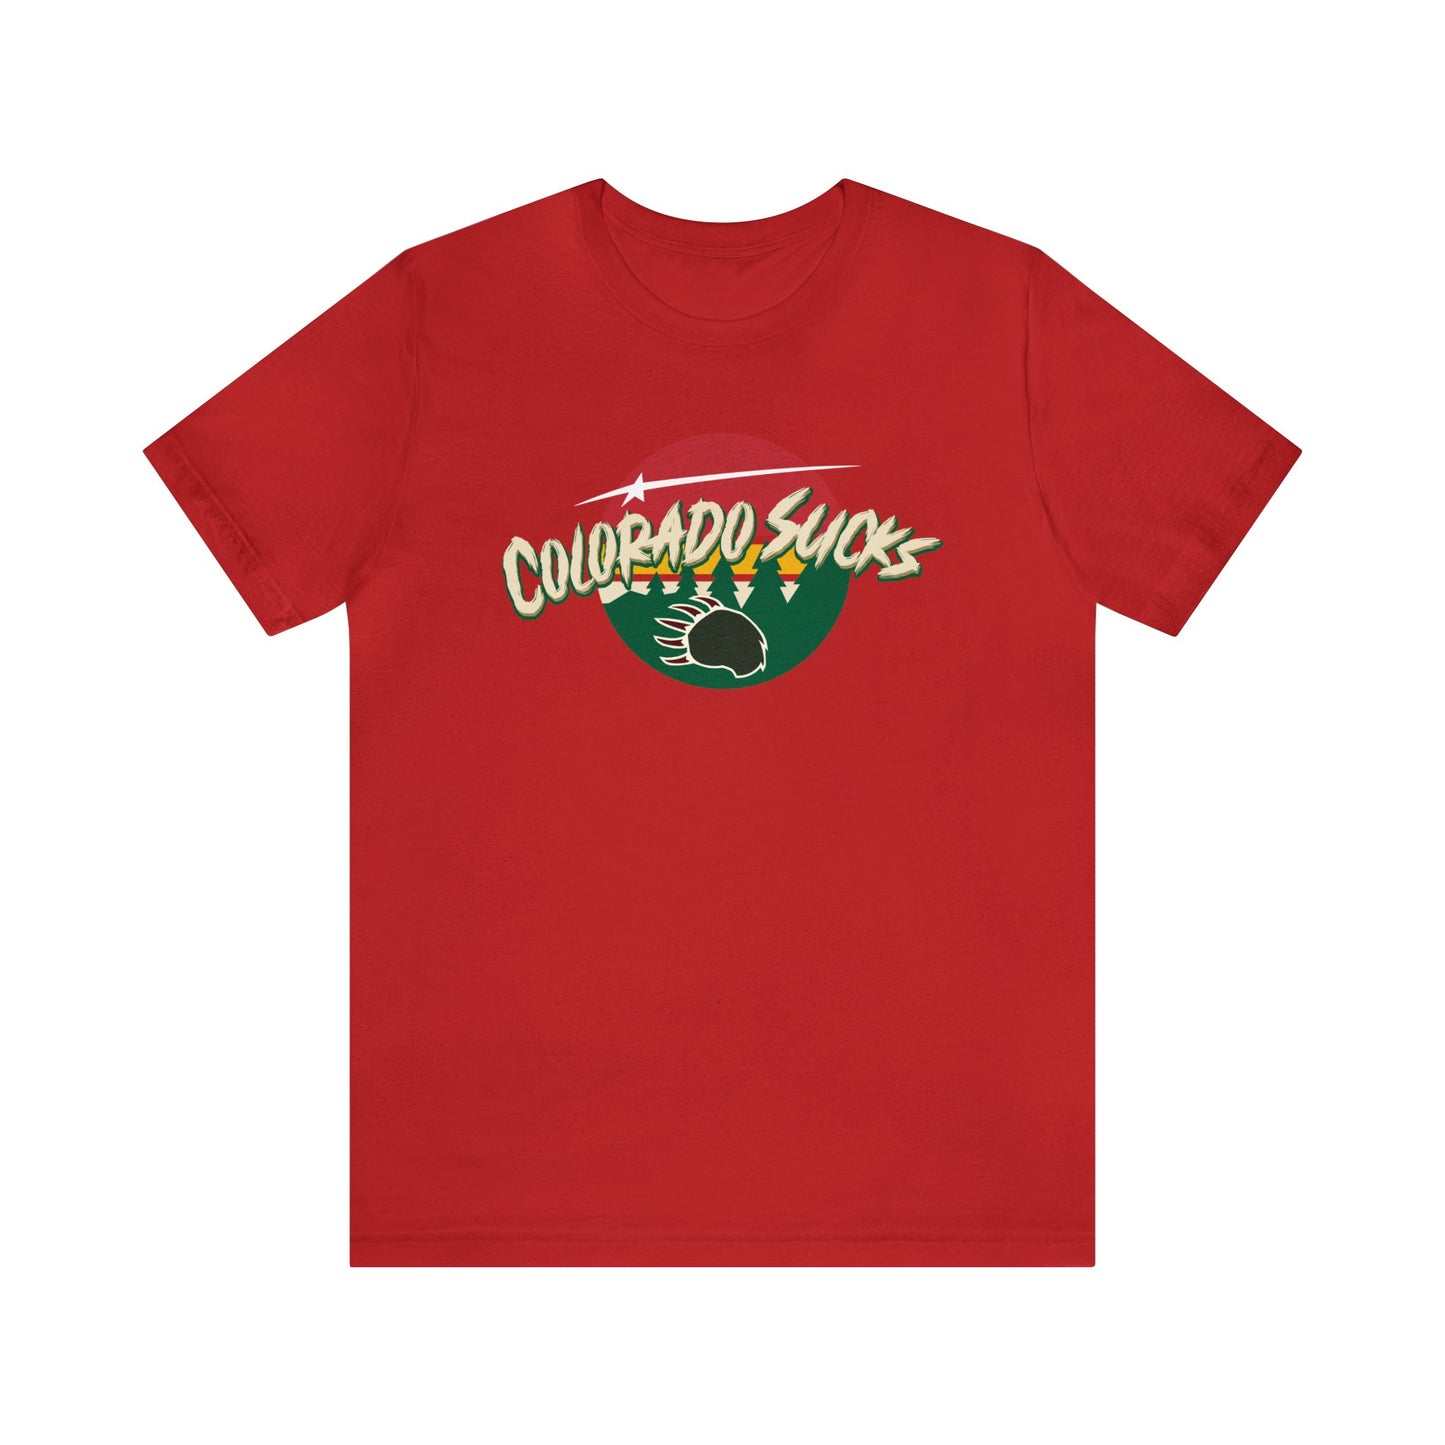 Avalanches Really Suck - Unisex Jersey Short Sleeve Tee